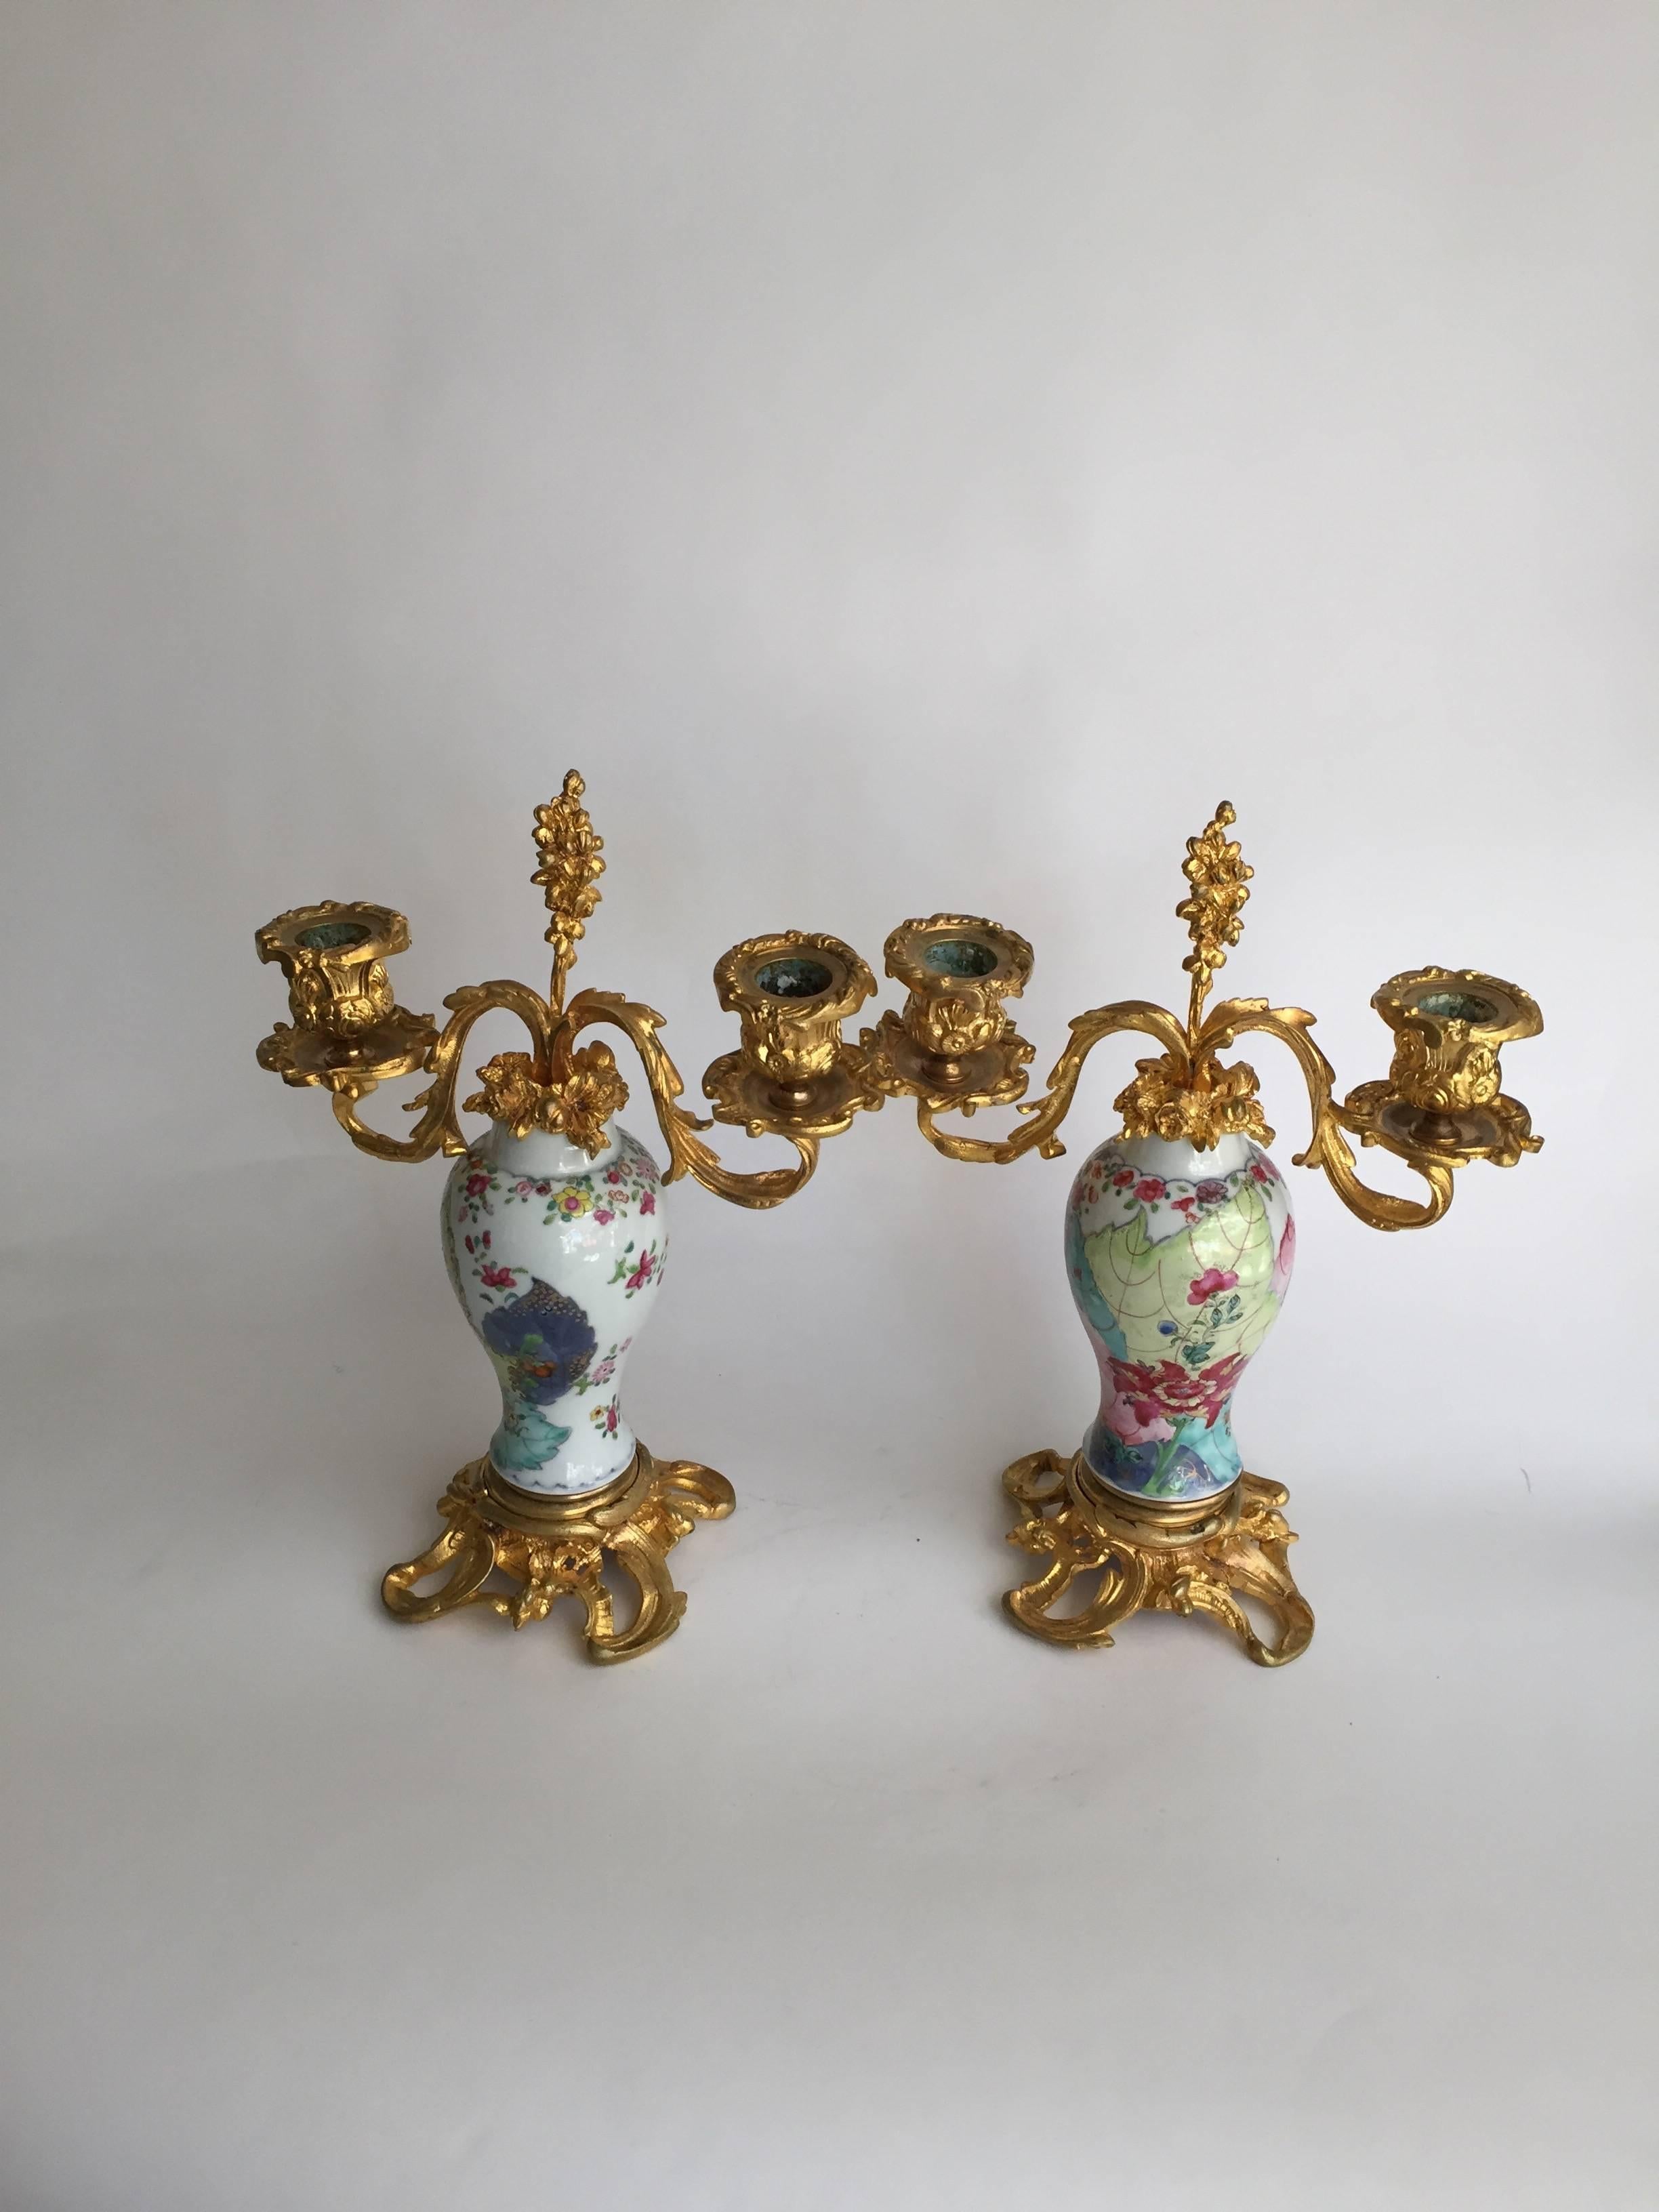 Chinese Export Porcelain and Ormolu-Mounted Two-Arm Candelabra For Sale 1